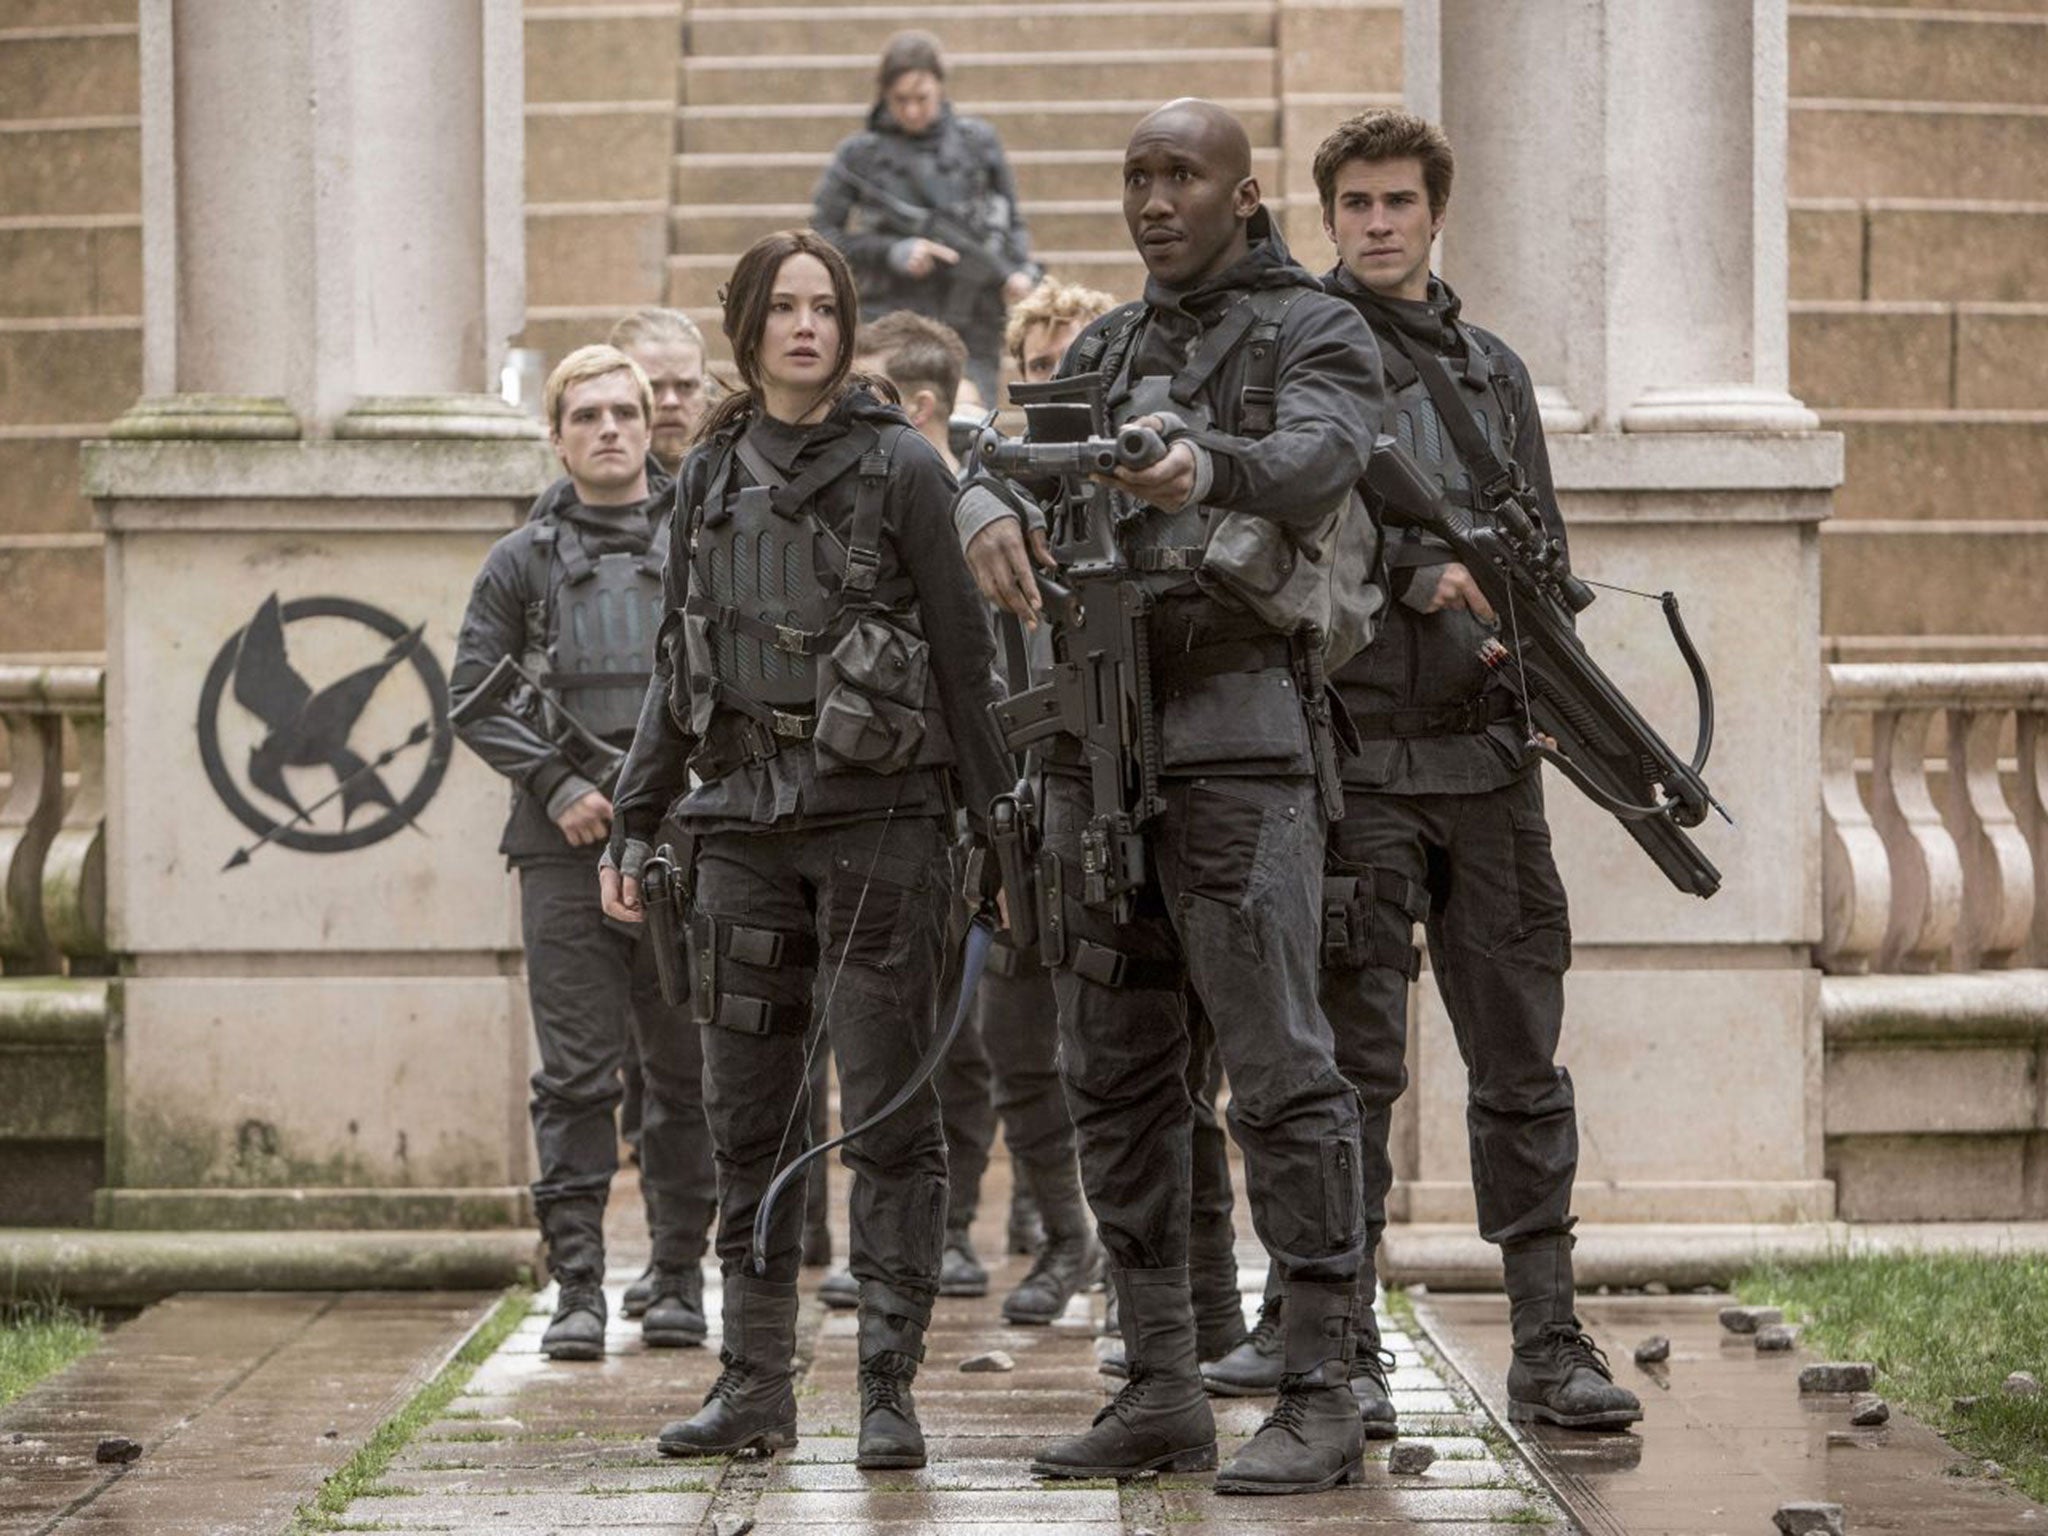 Together with Gale (Liam Hemsworth), Finnick (Sam Claflin) and other allies, Katniss ventures to the Capitol